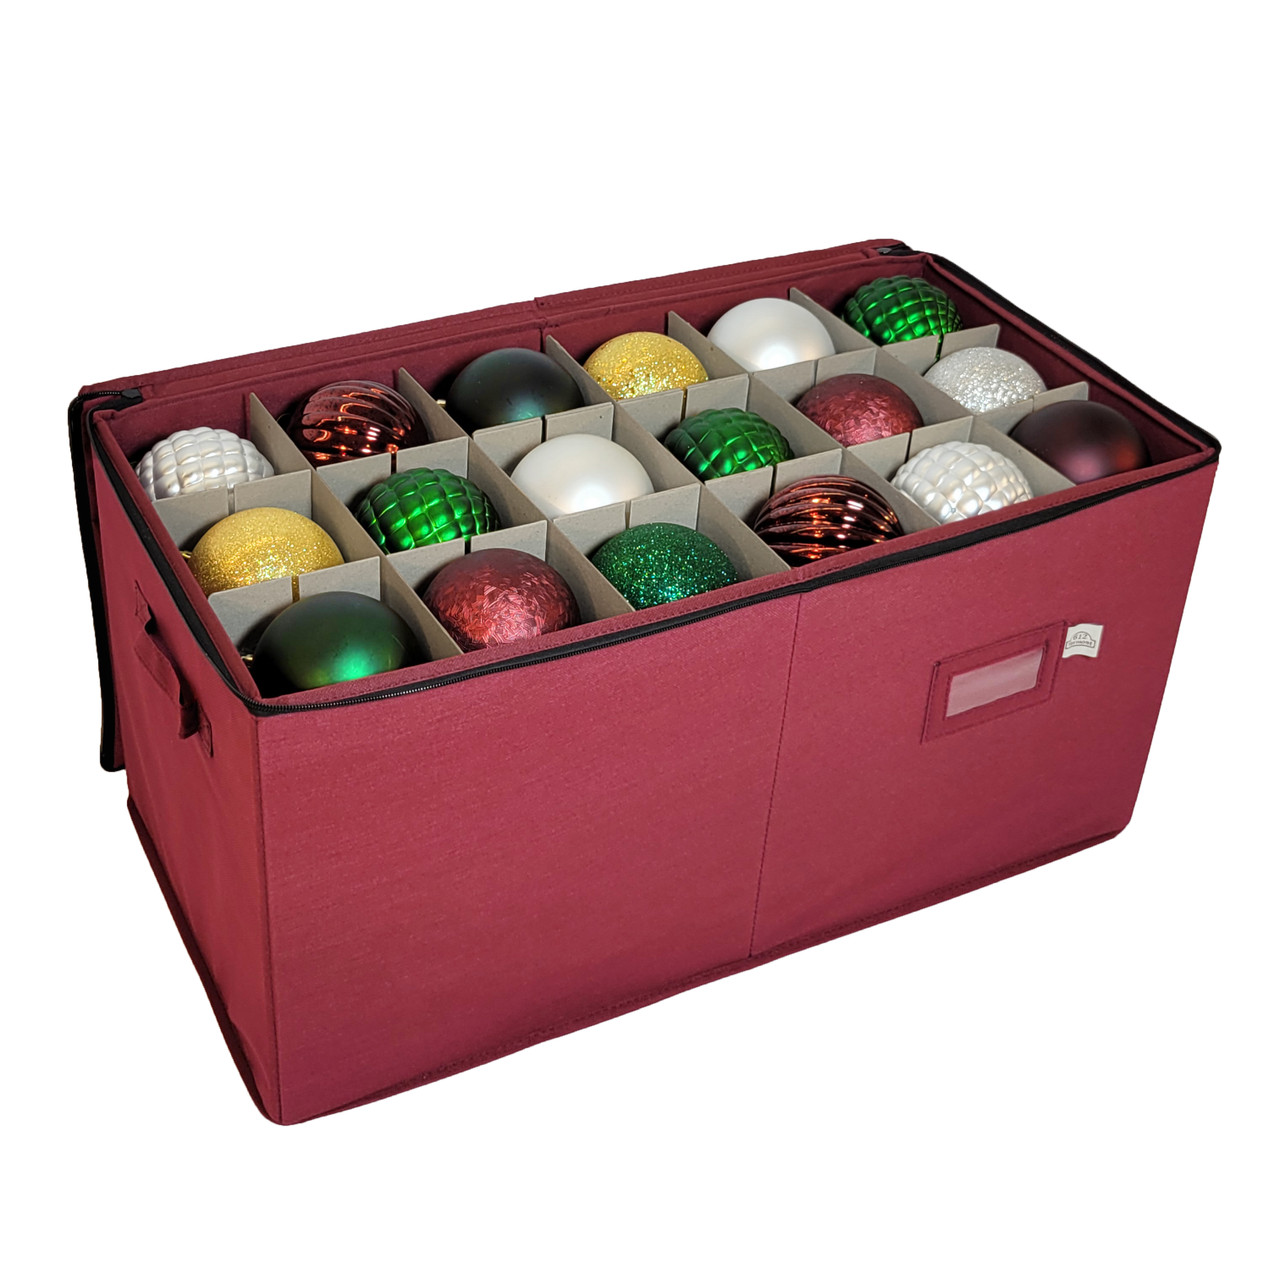 612 Vermont Christmas Ornament Storage Box with Adjustable Acid-Free  Dividers, Holds 54 – 4 Inch Ornaments (26”L x 13”W x 13”H, SB-40044-VT) -  612 Vermont